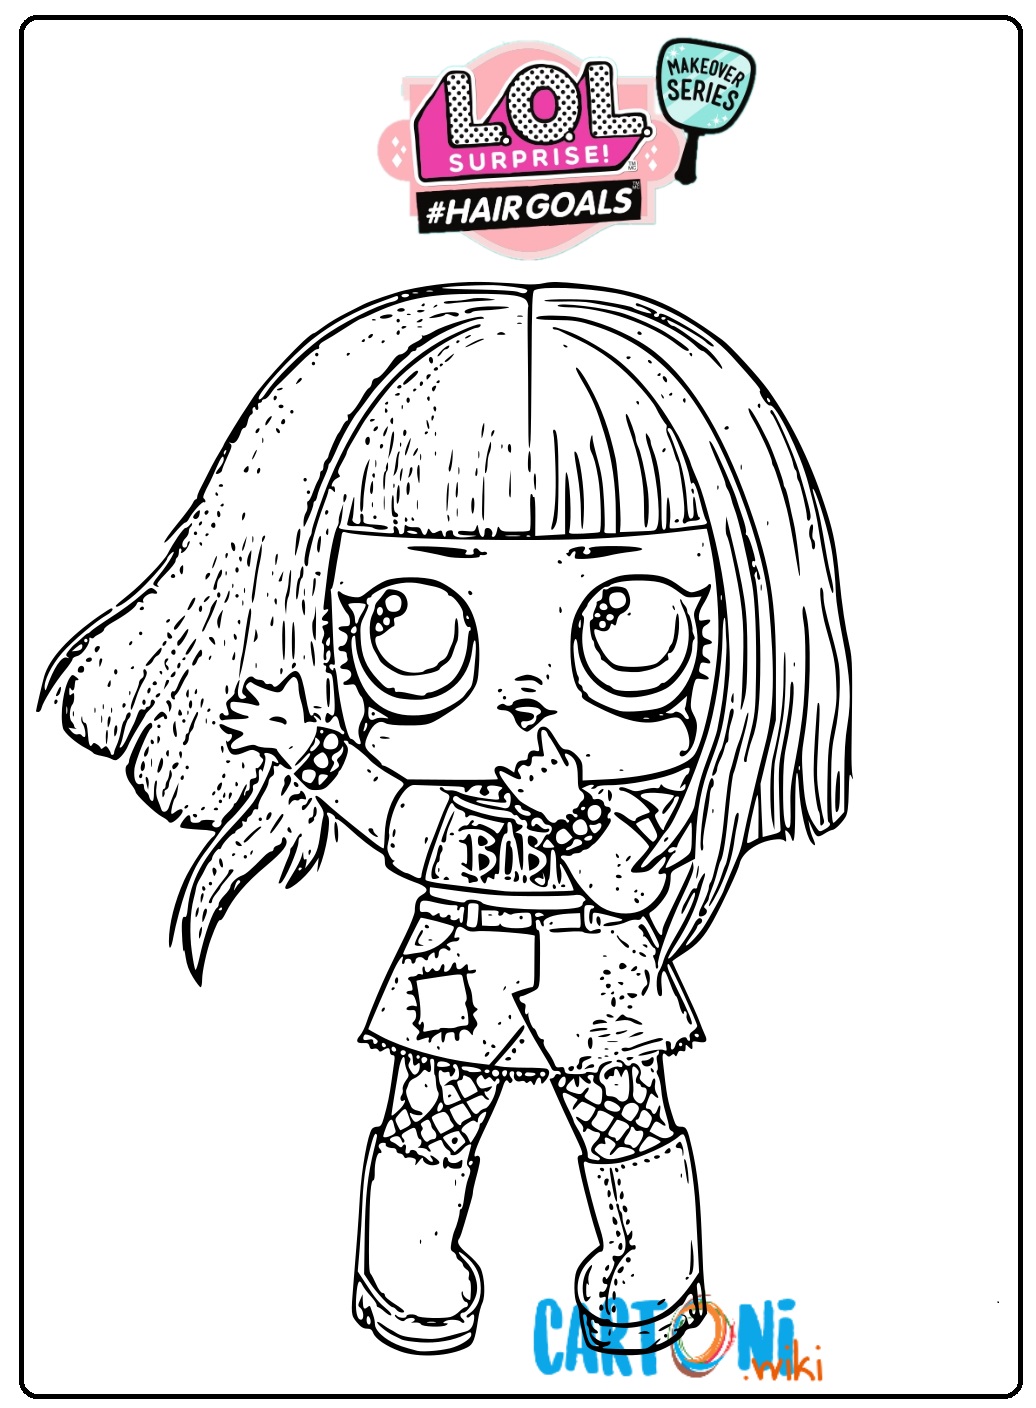 Metal Babe Lol Surprise hair goals coloring page